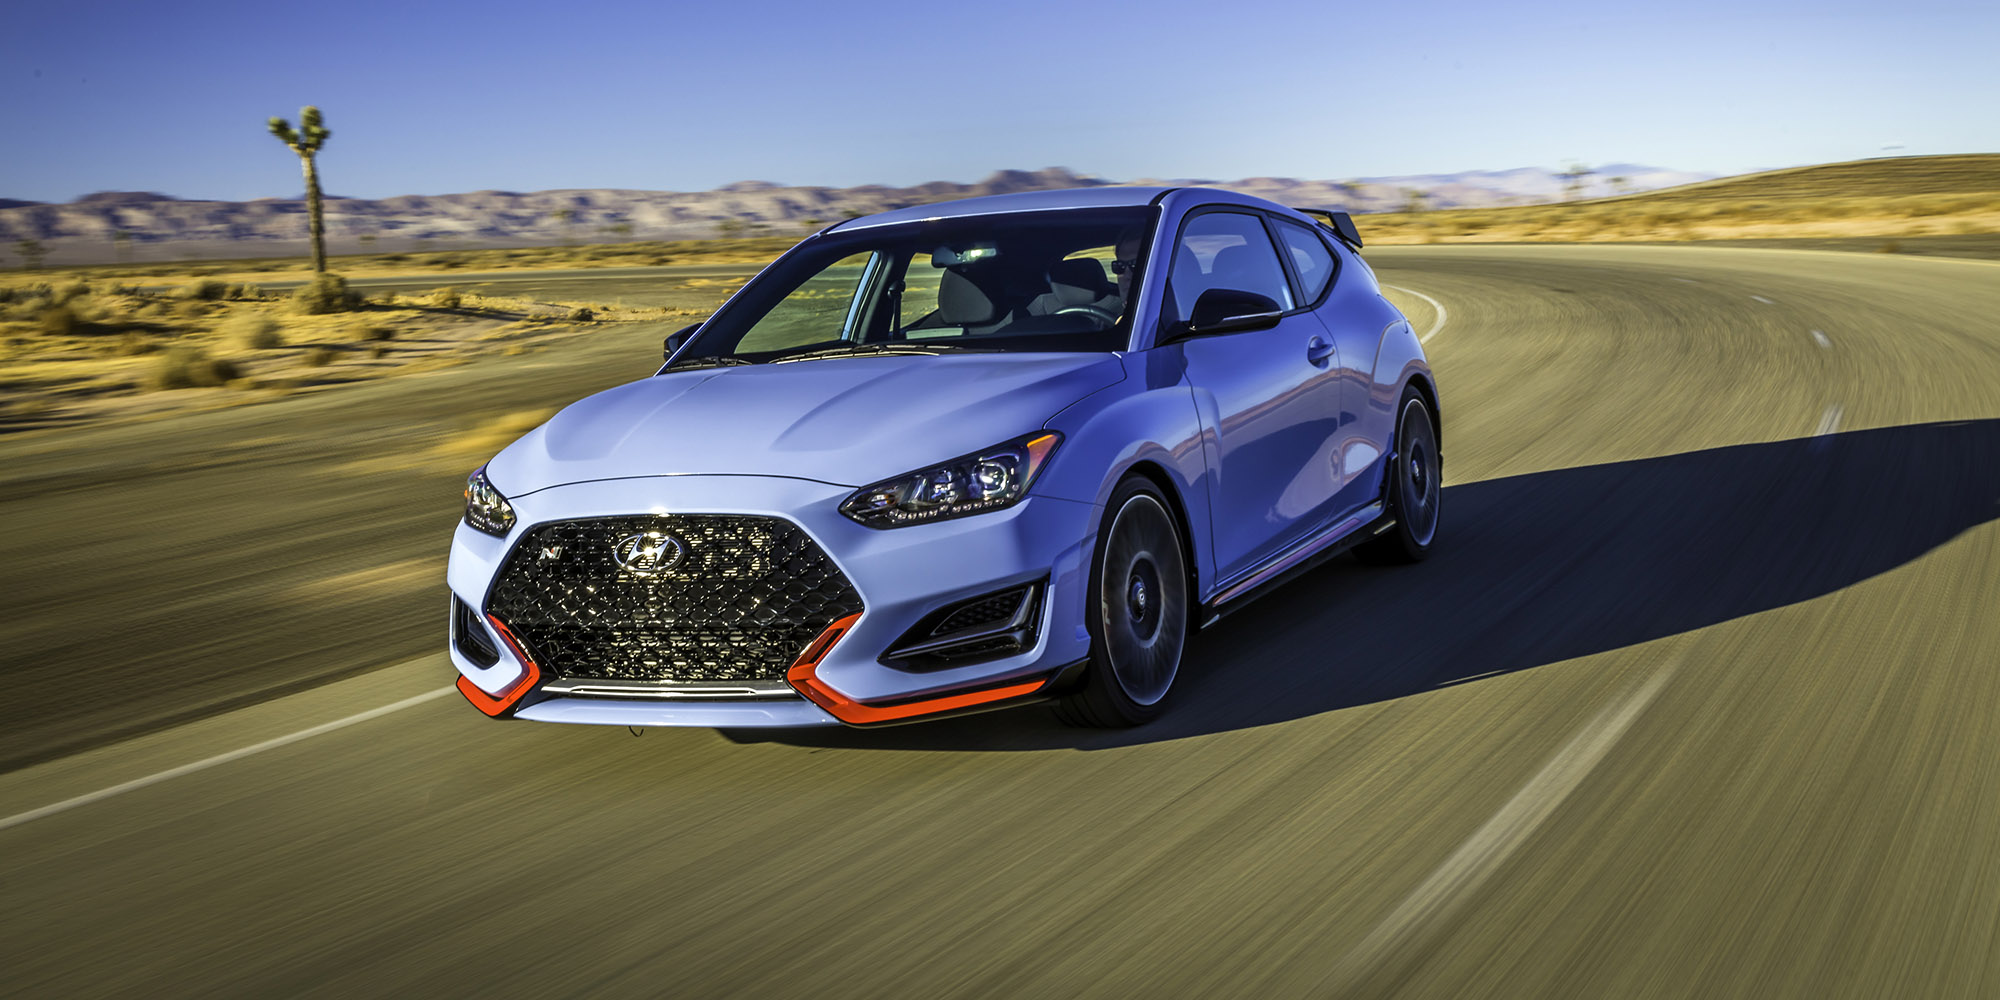 2018 Hyundai Veloster & Veloster N unveiled - Photos (1 of ...